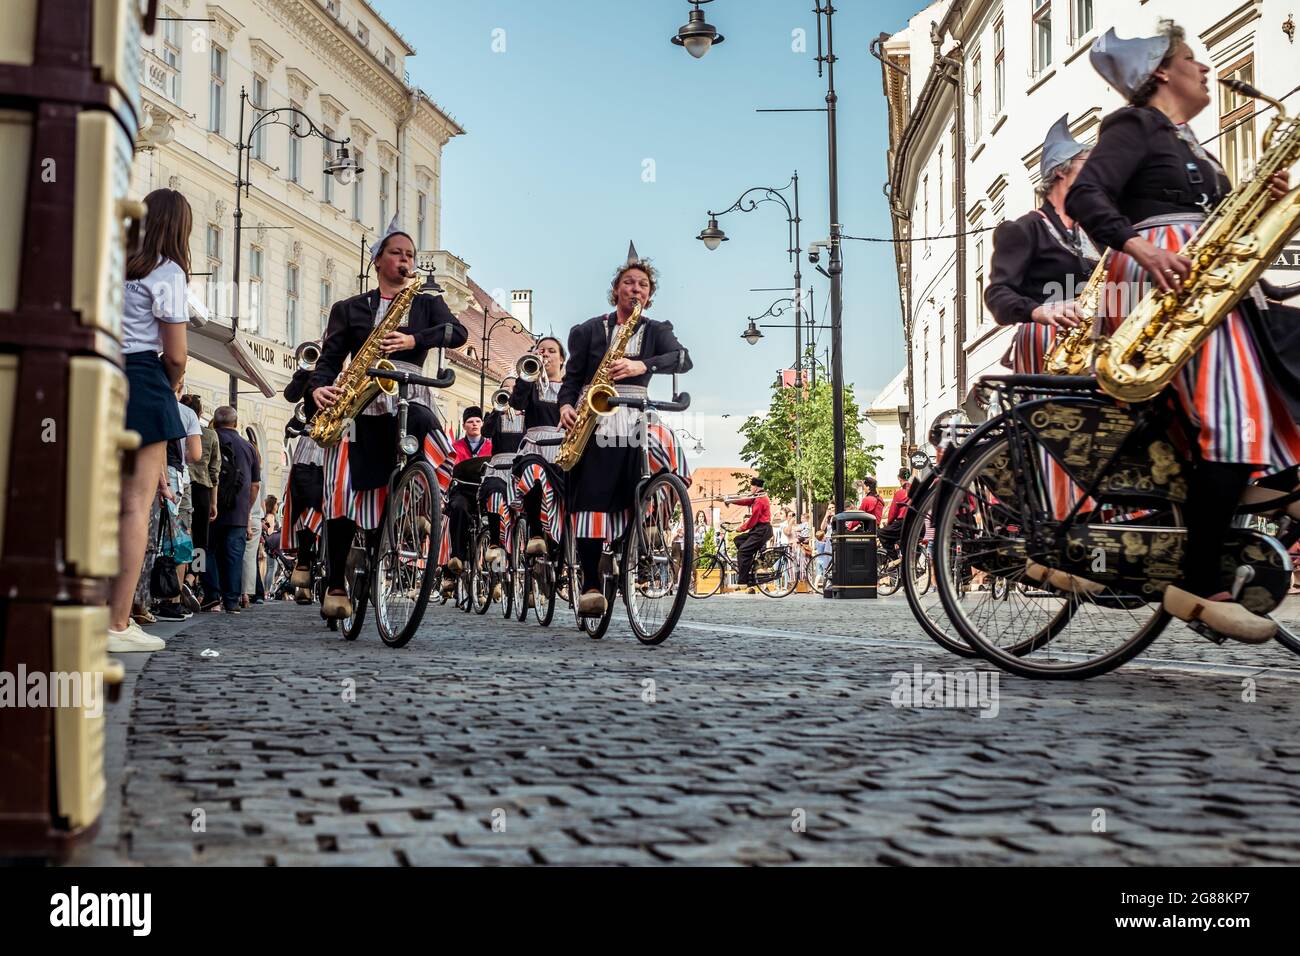 Sibiu City, Romania - 14 June 2019. Crescendo Opende Bicycle Band from Netherlands performing at the Sibiu International Theatre Festival from Sibiu, Stock Photo